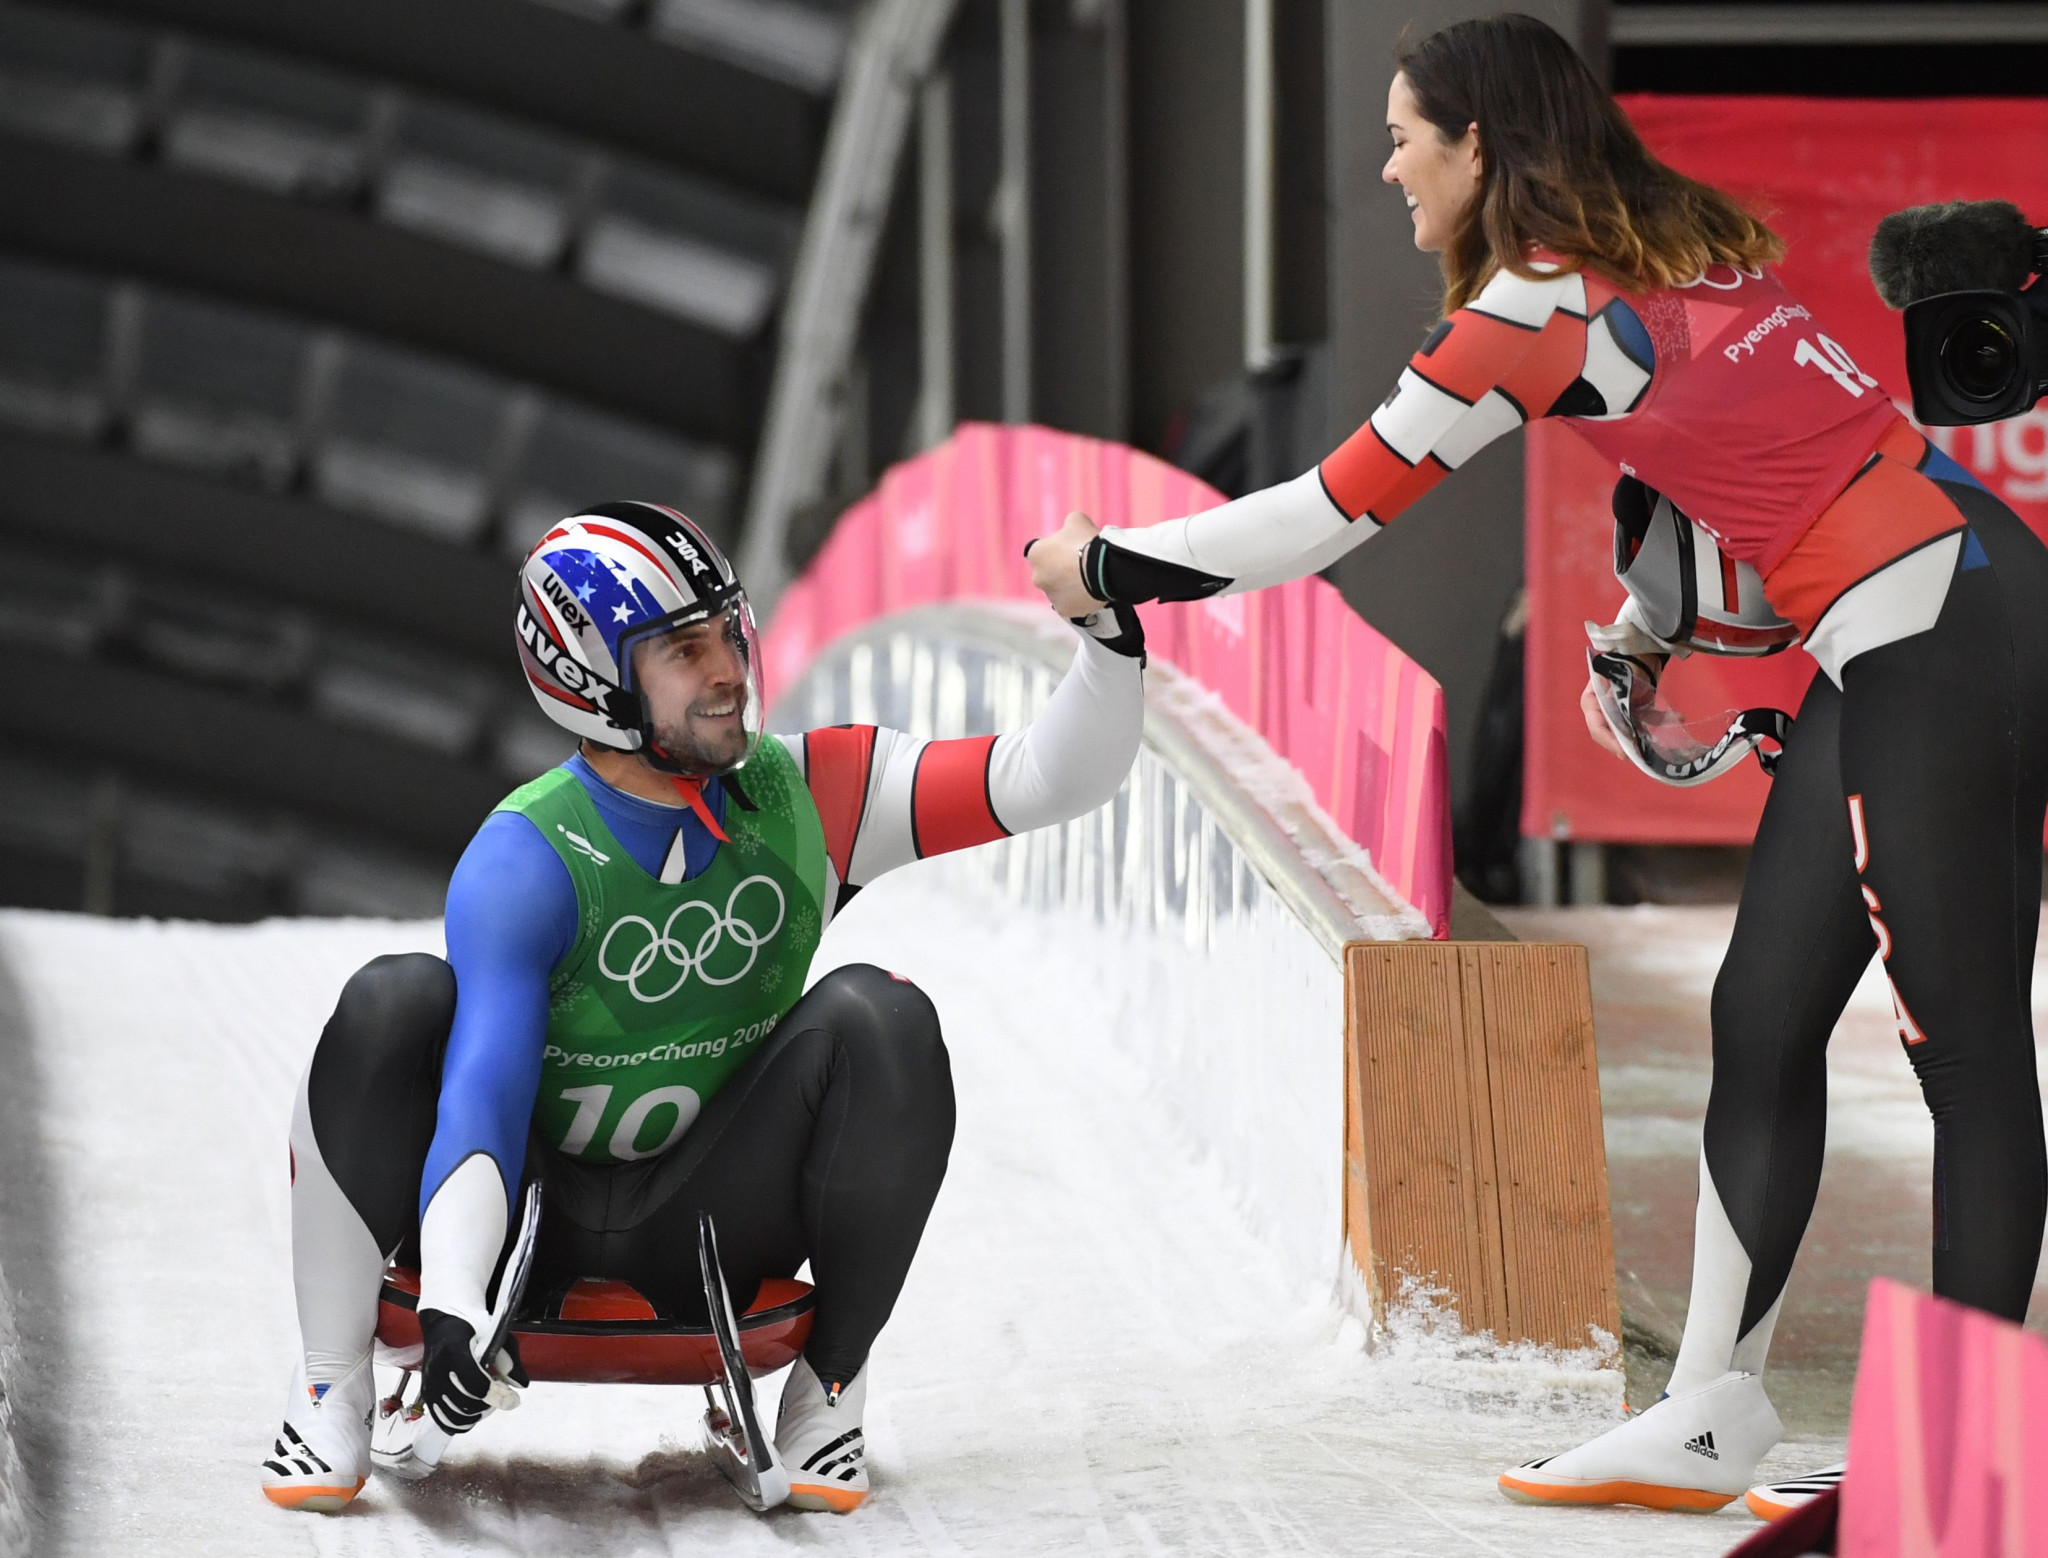 Chris Mazdzer claimed silver in the men's luge event at the 2018 Winter Olympics ©Getty Images